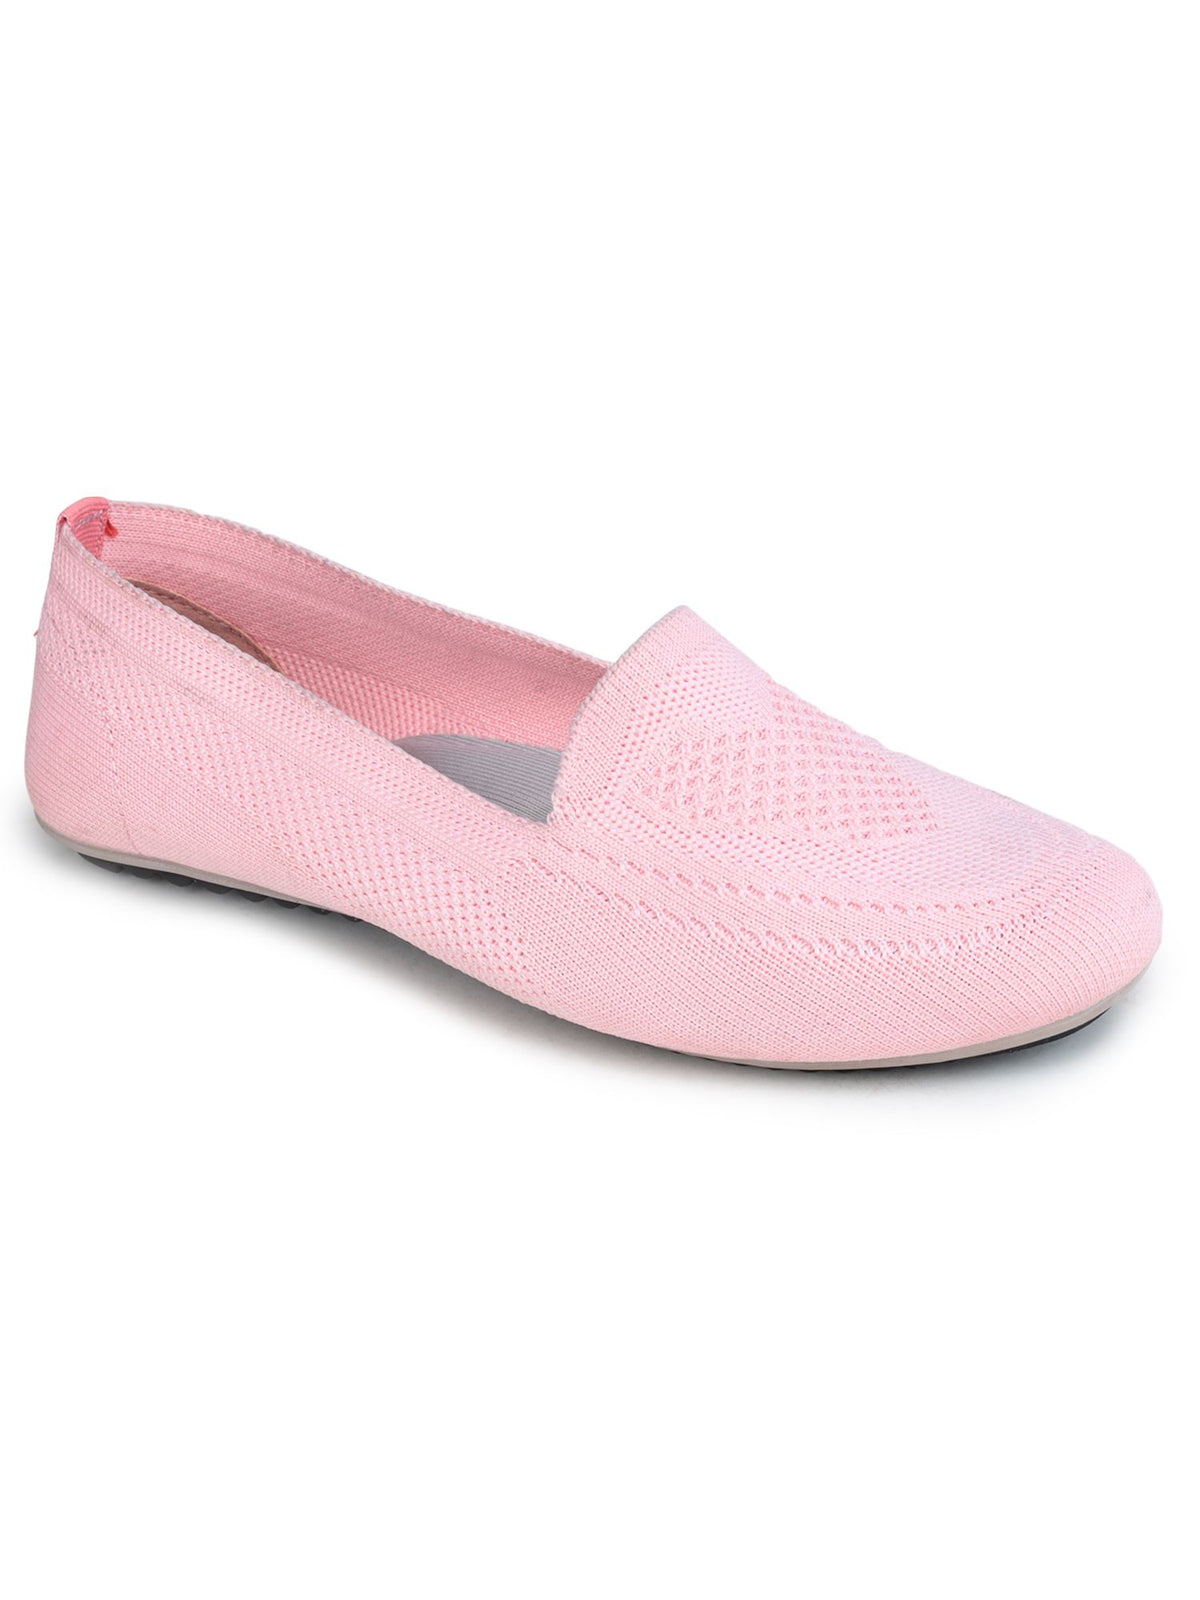 Pink Solid Textile Slip On Casual Bellies for Women